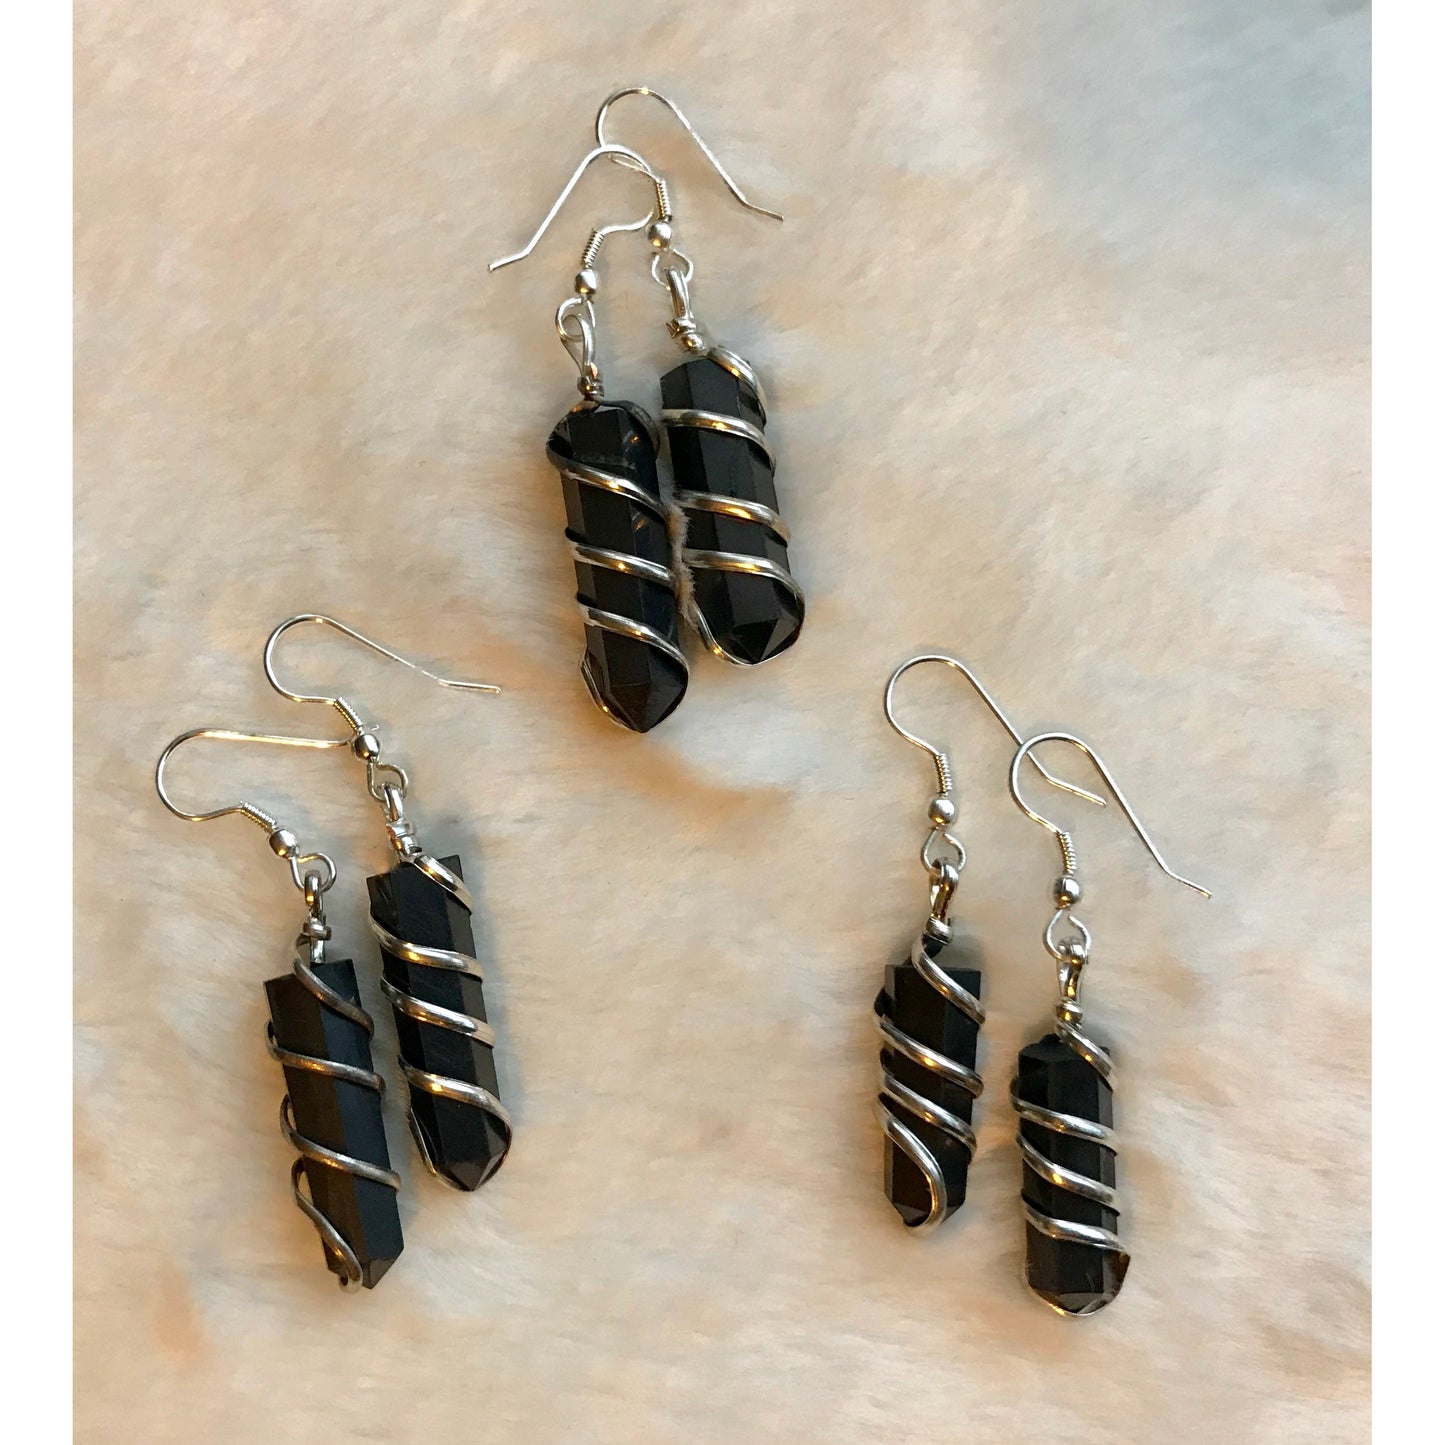 Grounding Energies: Shungite Spiral Earrings for Protection and Balance